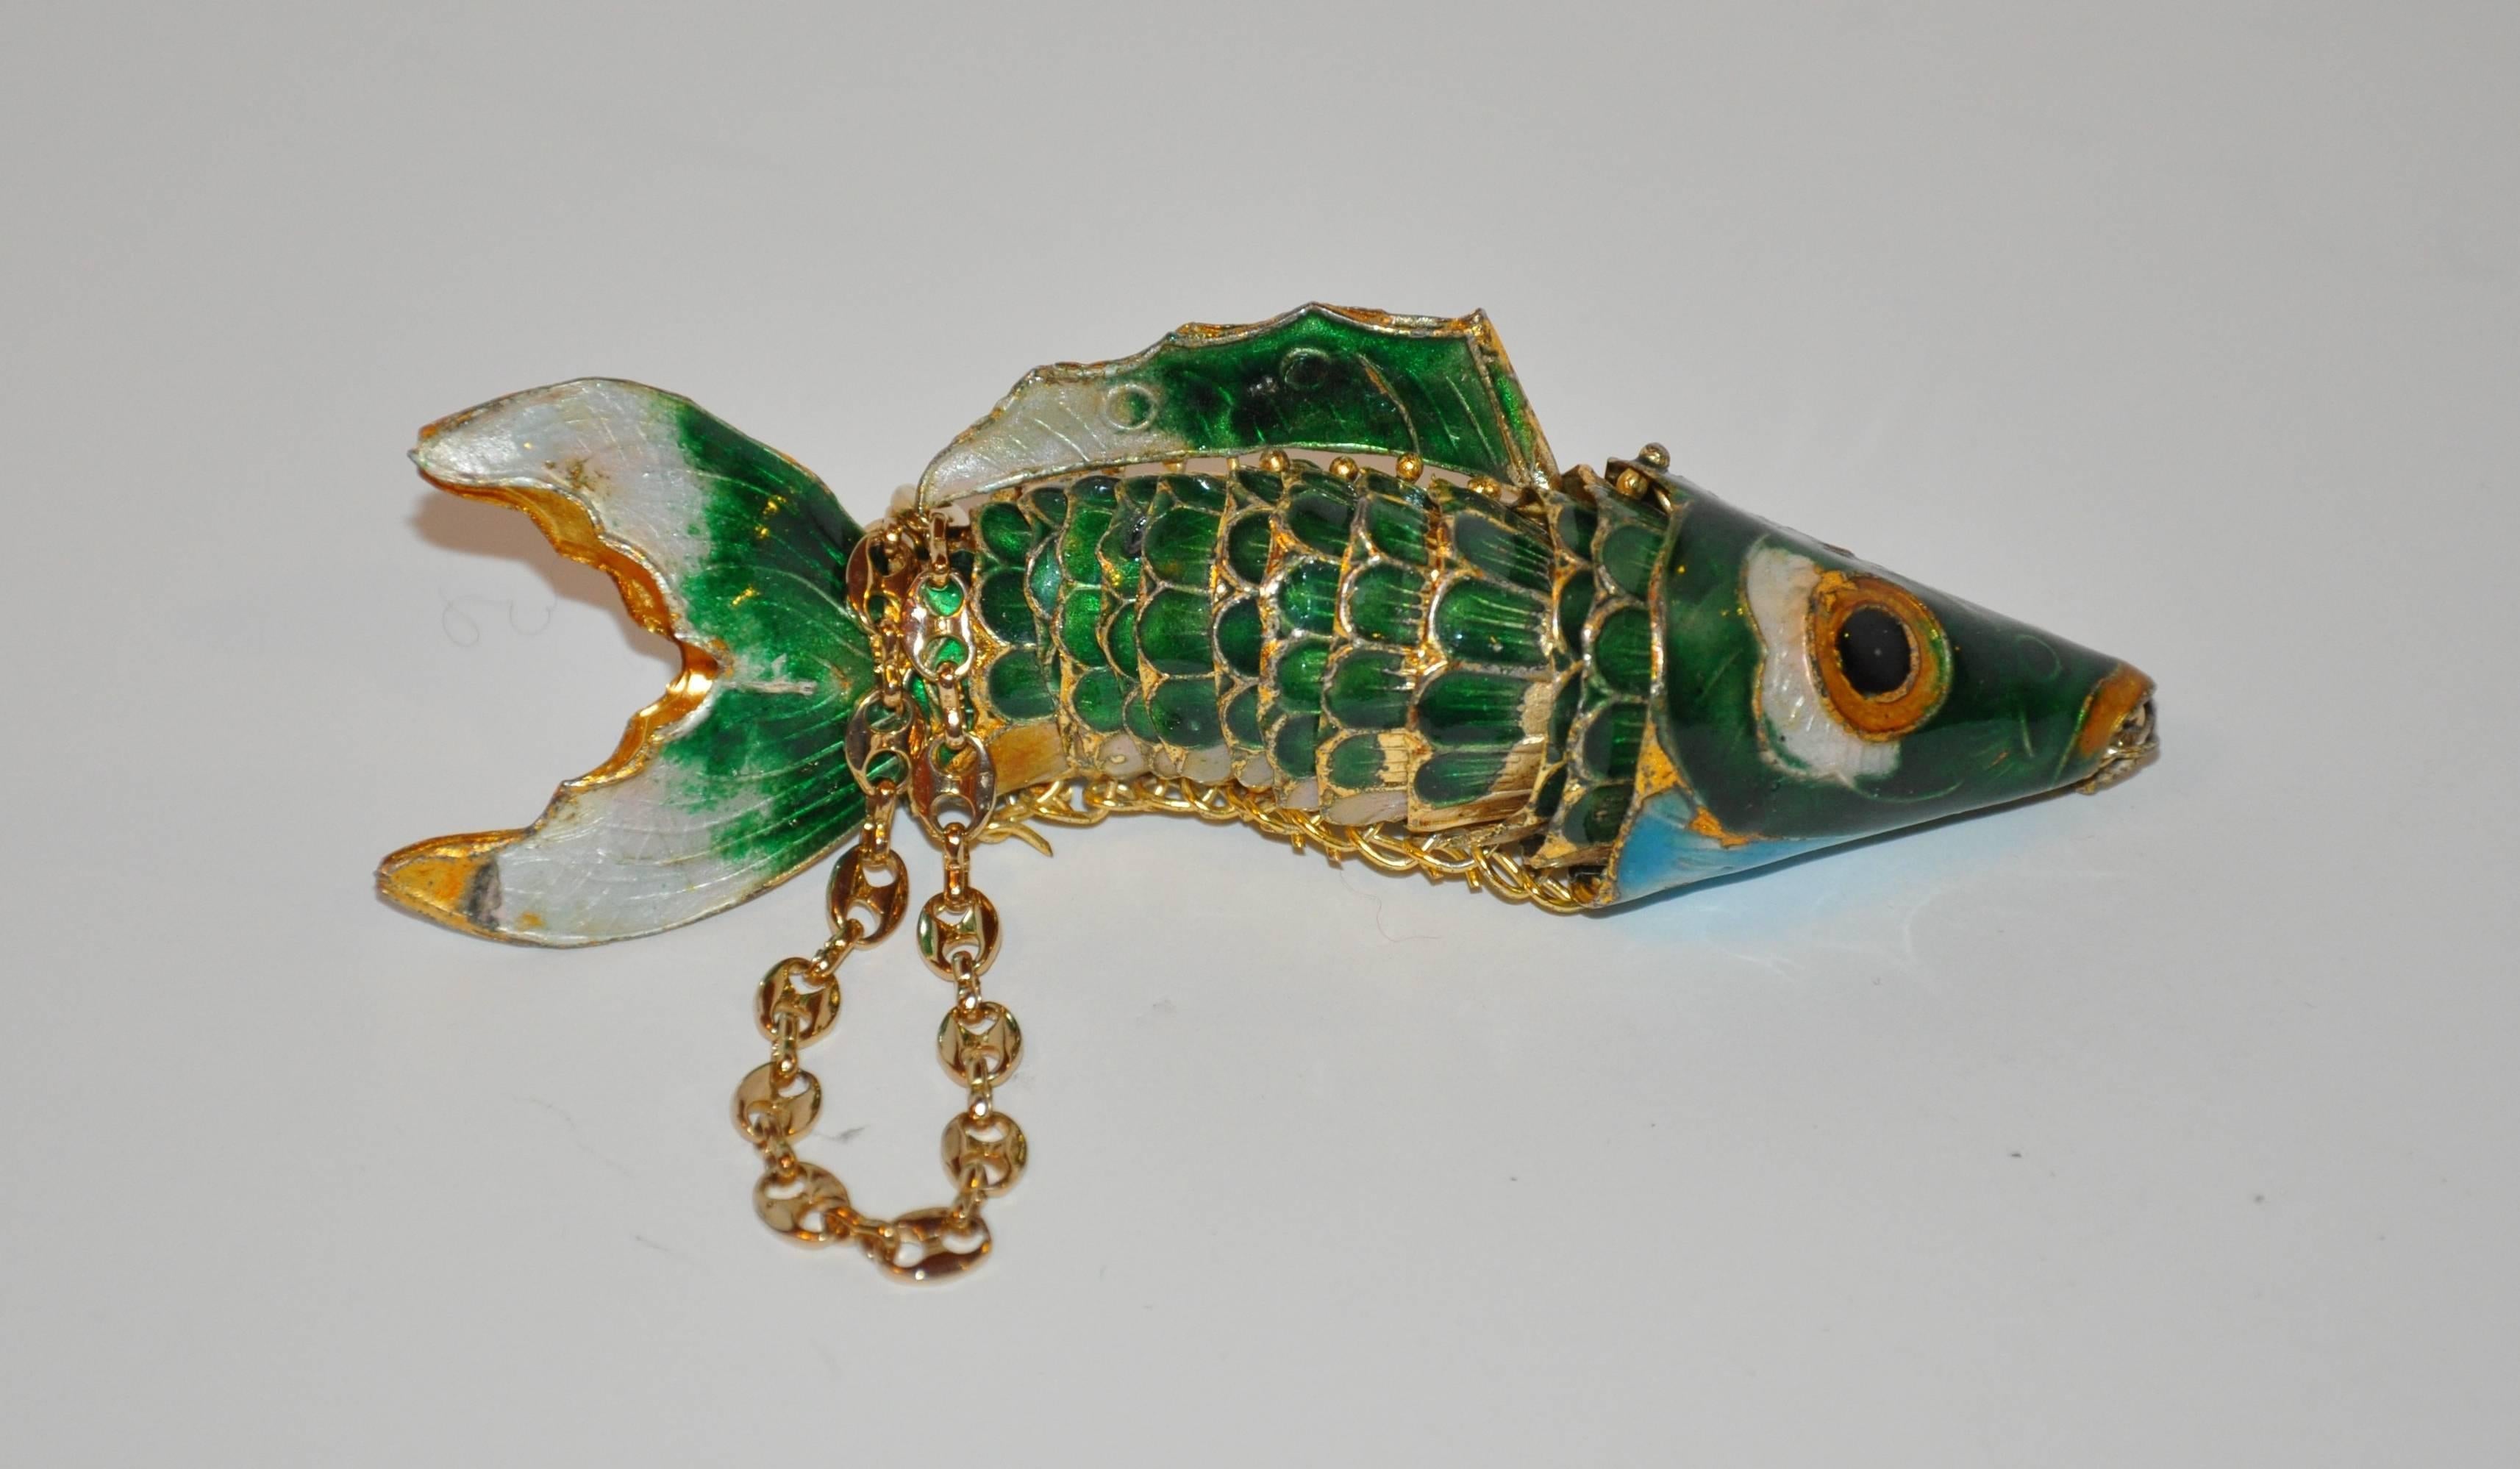 Brown Large Gold Hardware Enamel Fish with Gucci-Style Links Necklace.